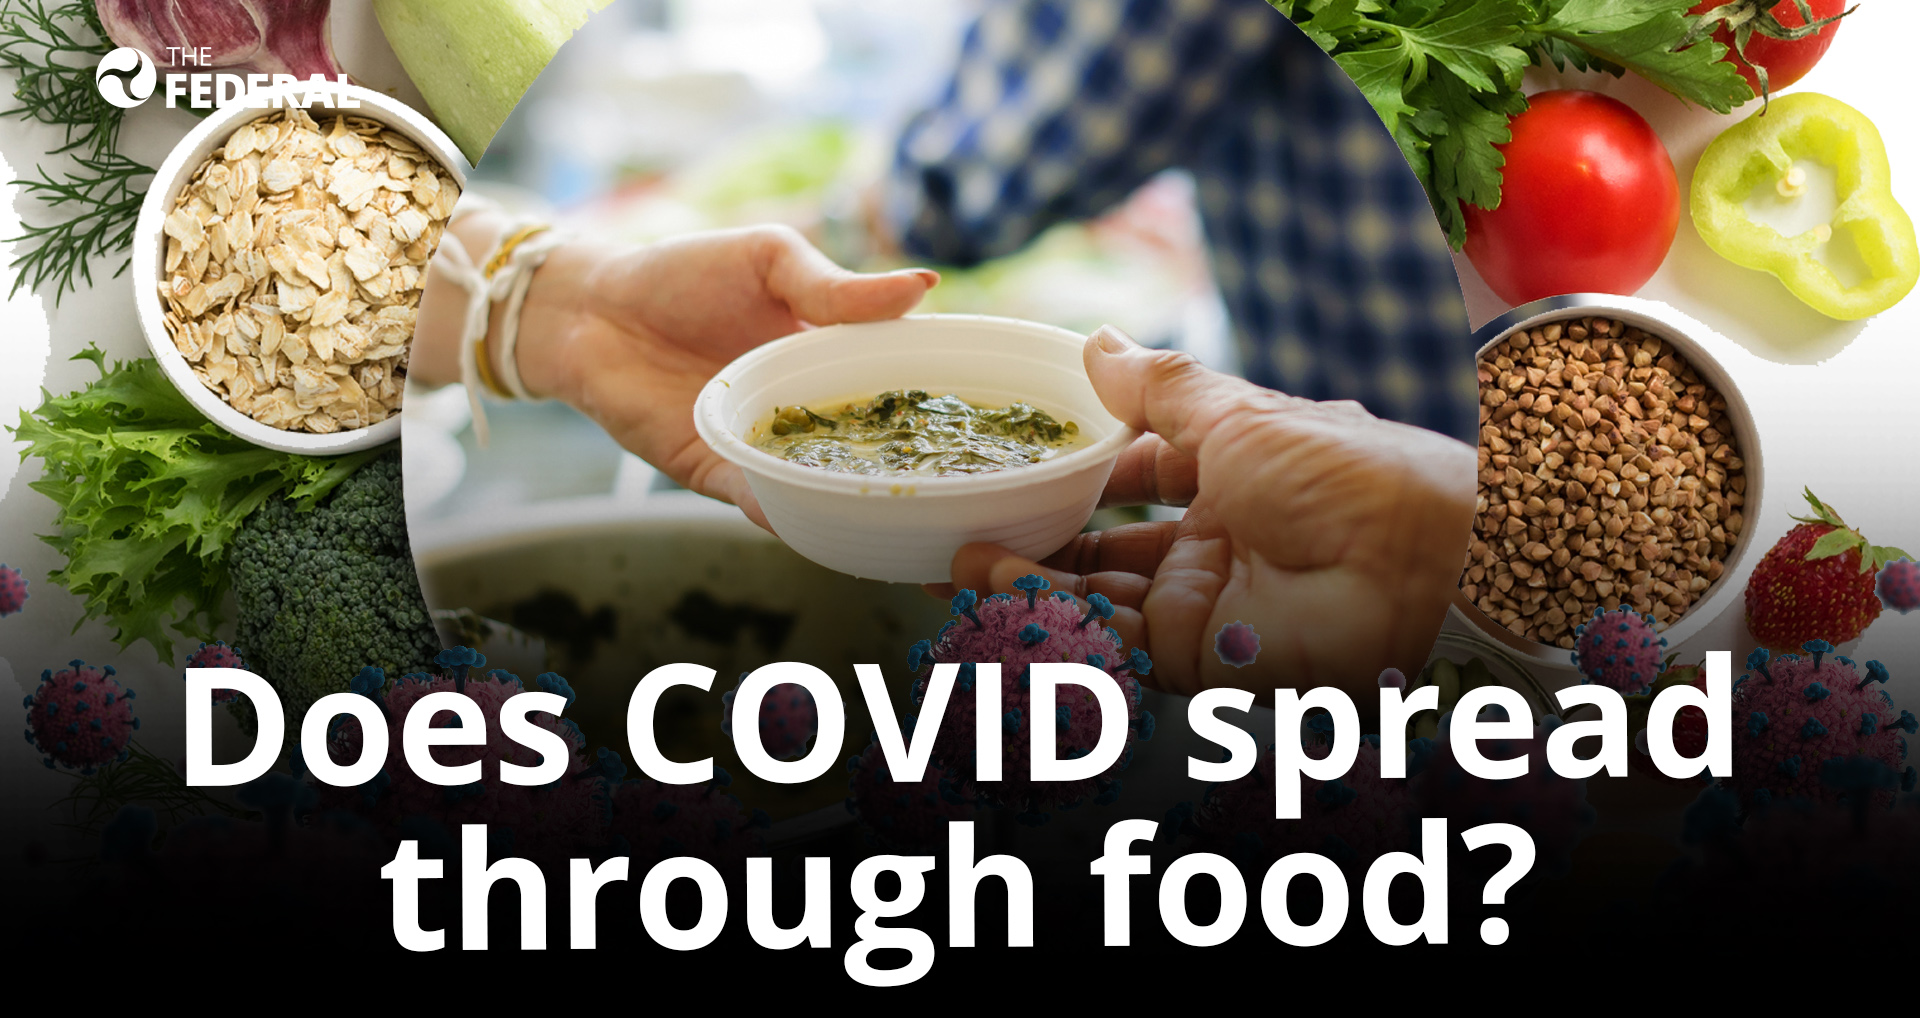 WHO lays to rest doubts over COVID spread via food